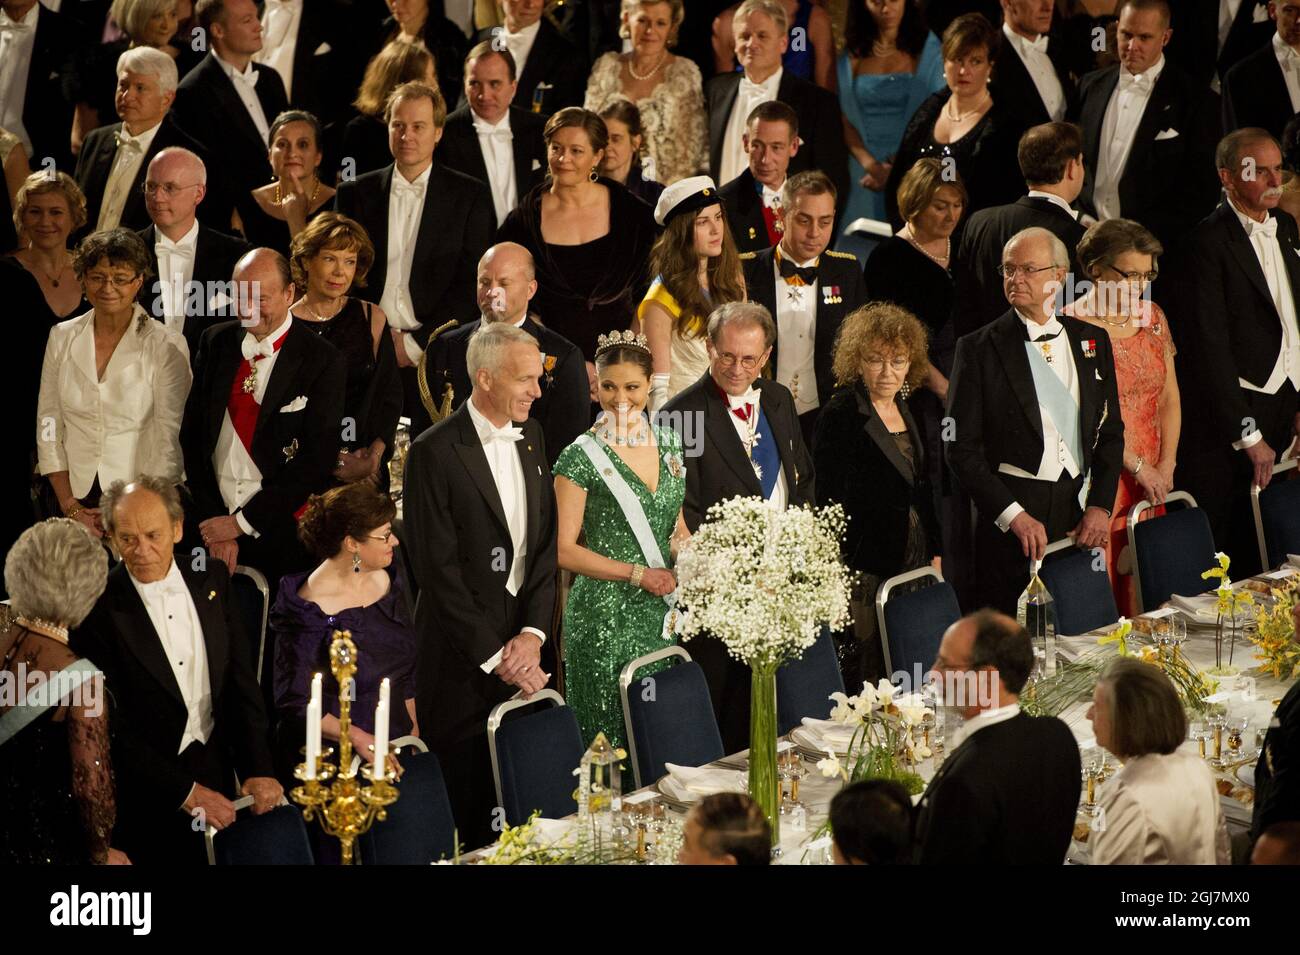 STOCKHOLM 2012-12-10 The guests at the honorary table, Brian K. Kobilka, Nobel Laureate in Chemistry,  Crown Princess  Victoria, Per Westerberg, Speaker of the House of Parliament, Claudine Haroche and King Carl Gustaf at the Nobel Banquet in the City Hall in Stockholm Sweden, December 10, 2012. Photo Jessica Gow  / SCANPIX code 10070   Stock Photo